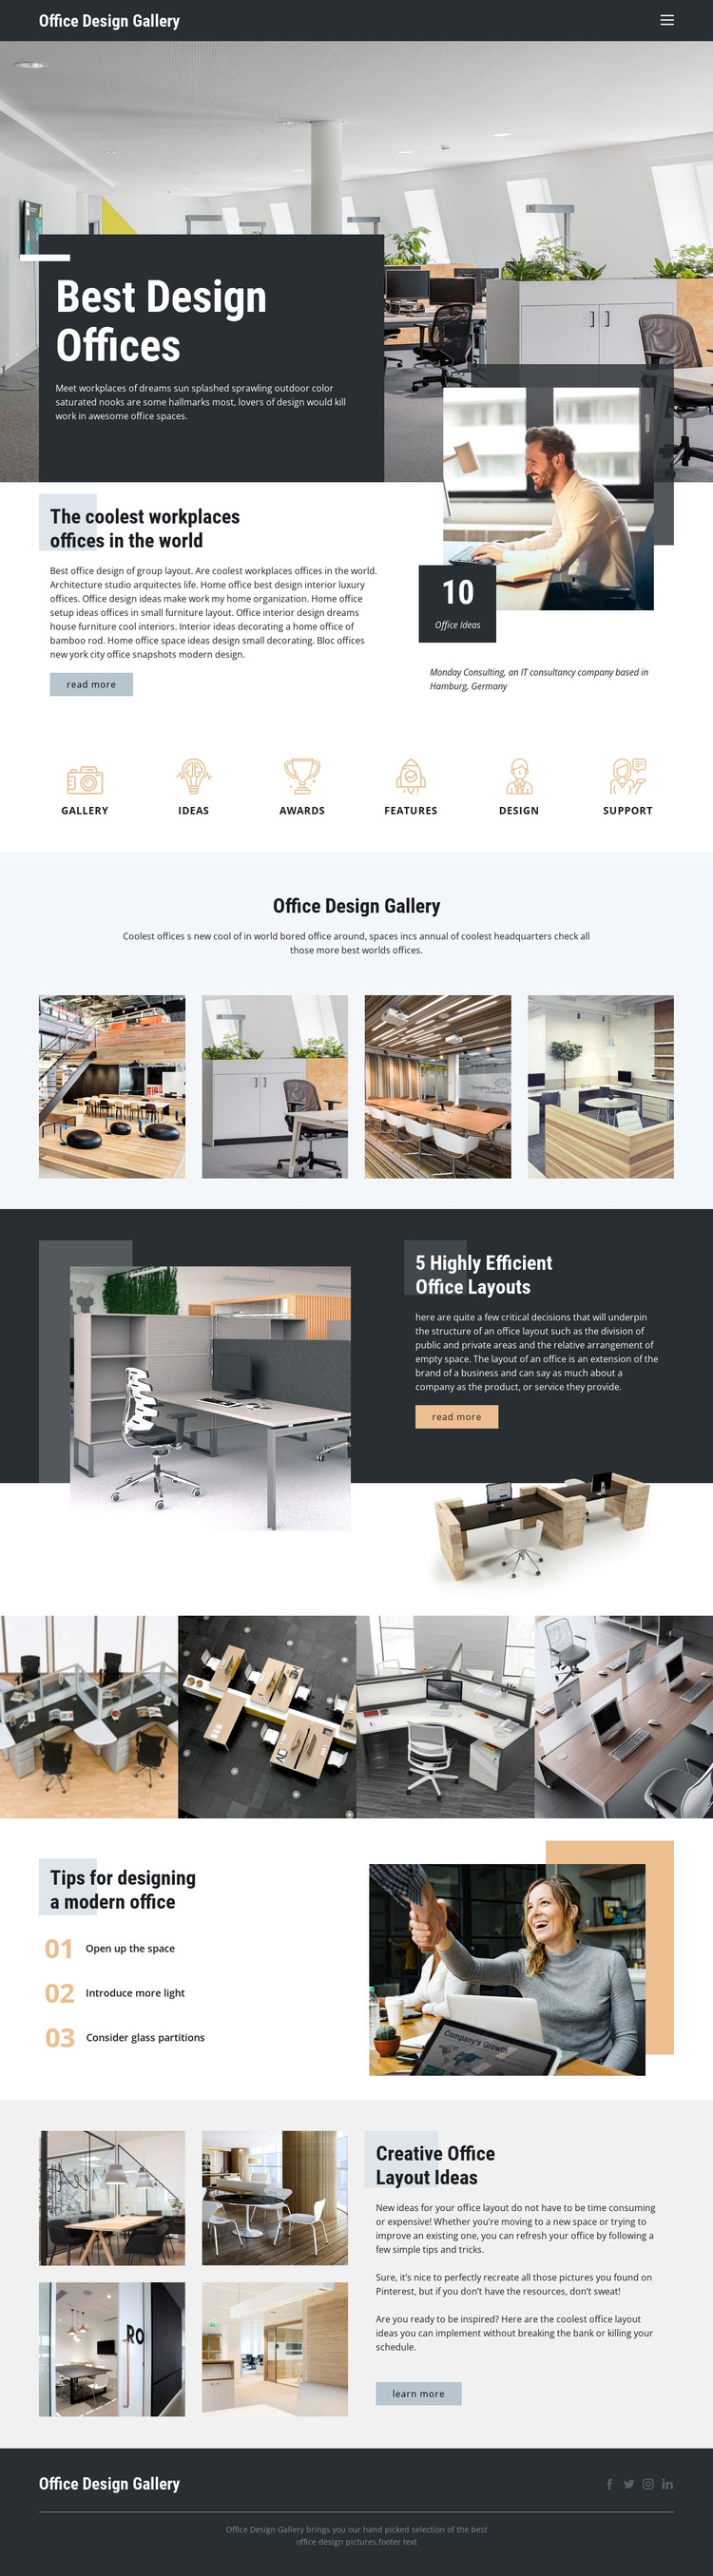 Best Design Offices HTML5 Template